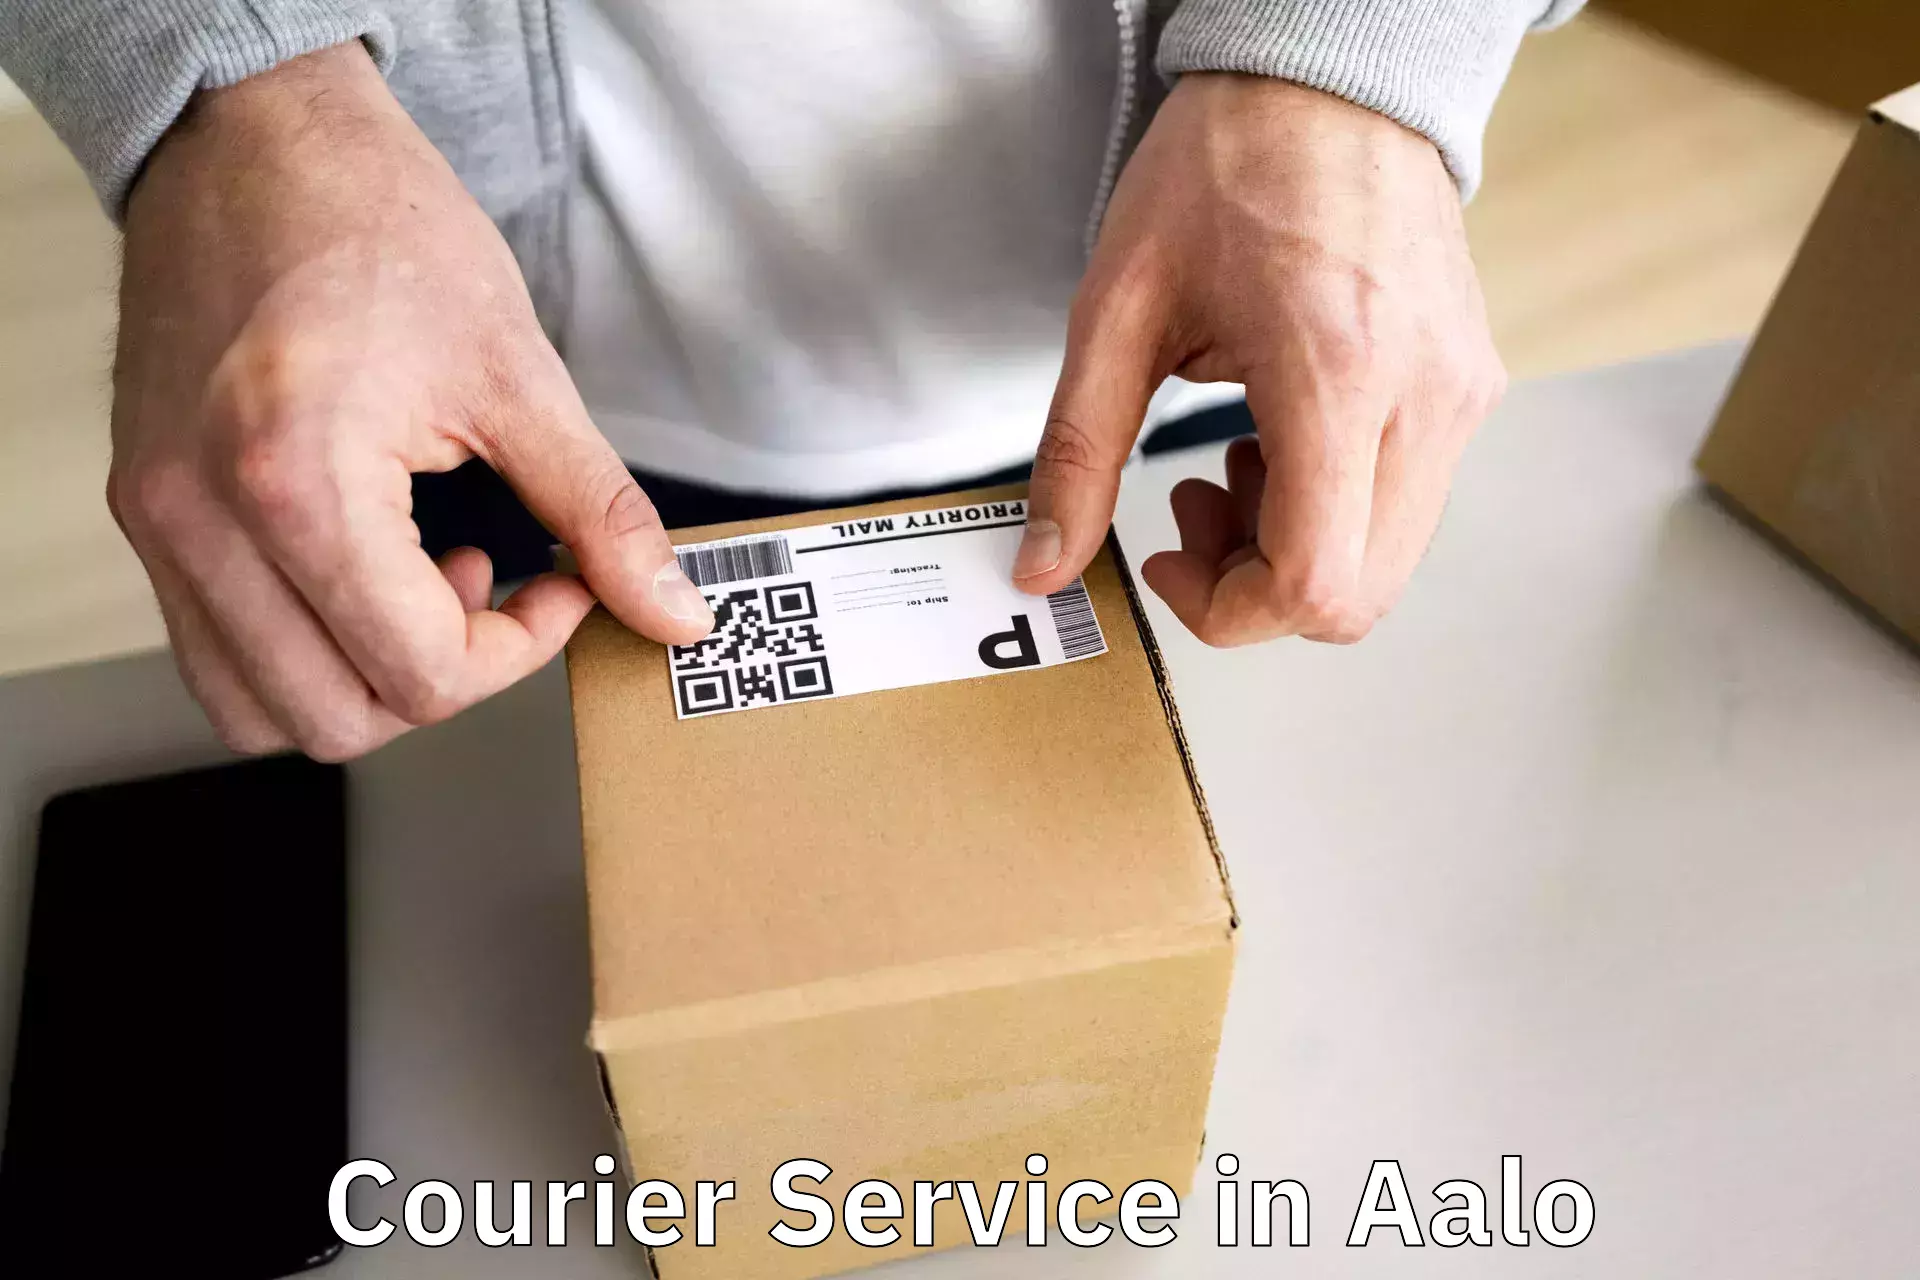 Seamless shipping experience in Aalo